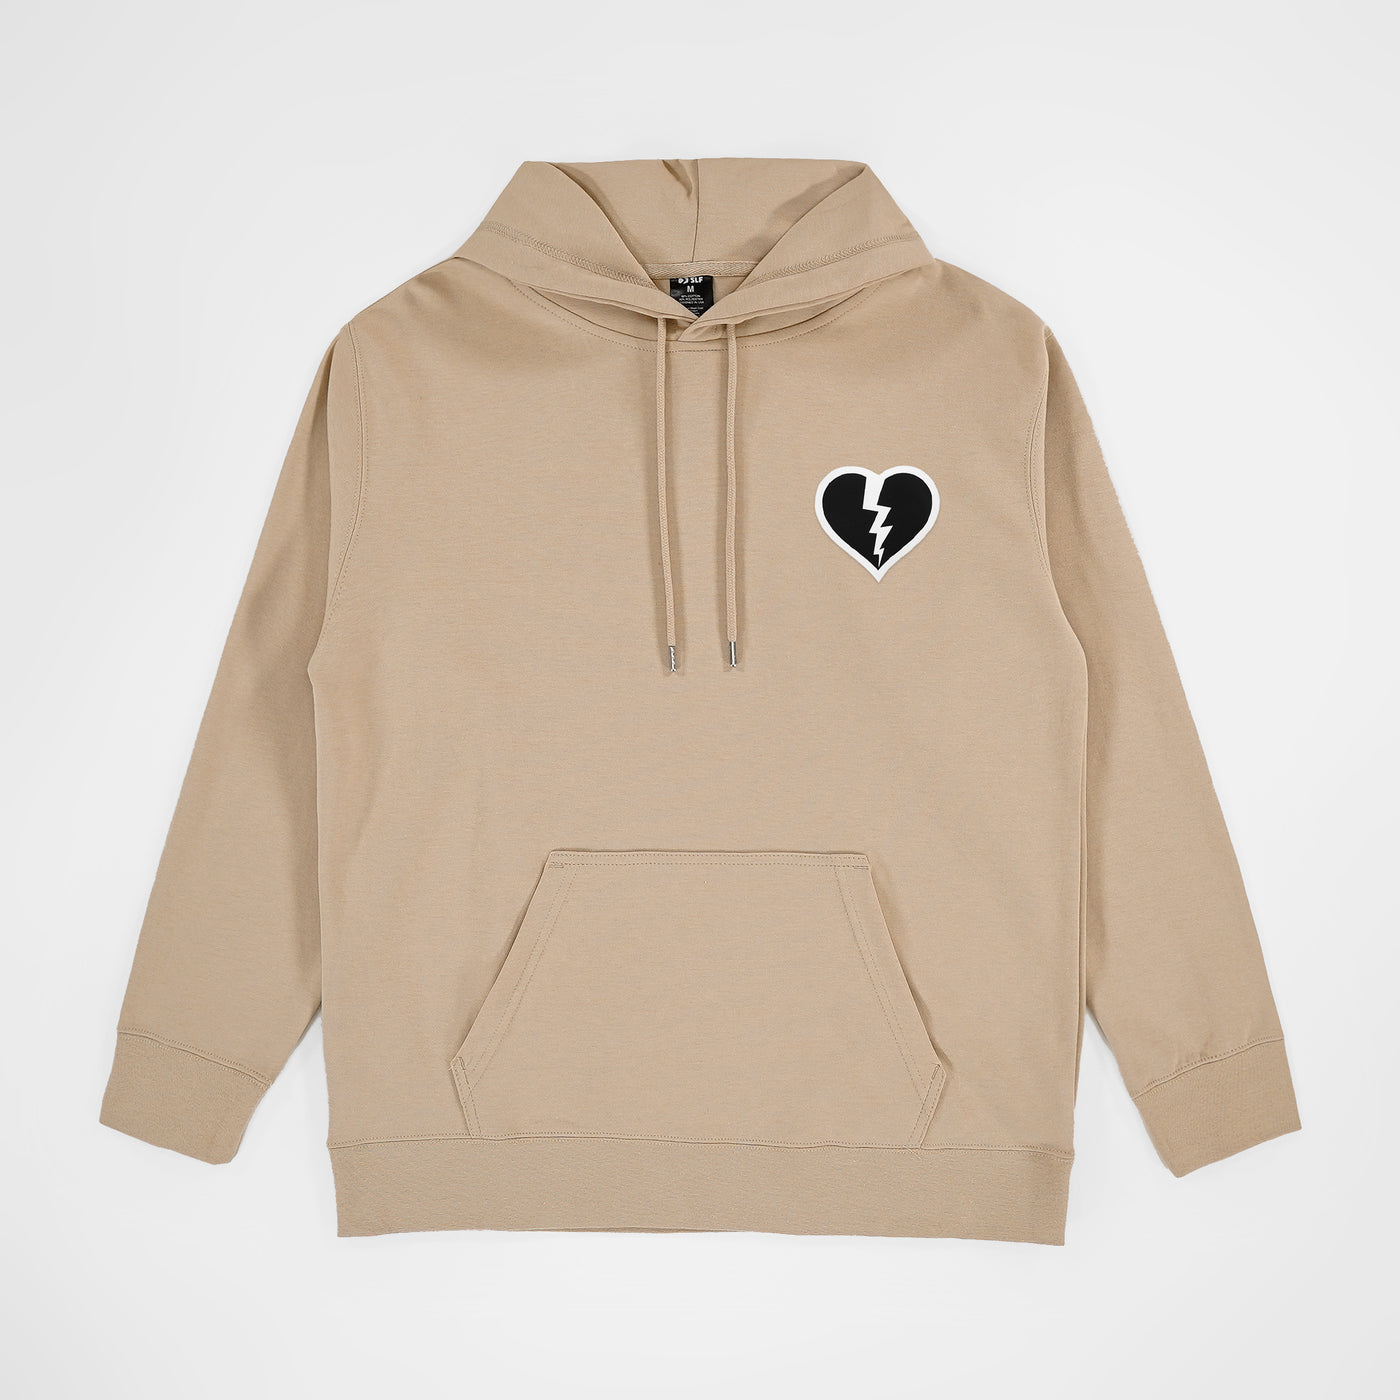 BRKN Patch Hoodie